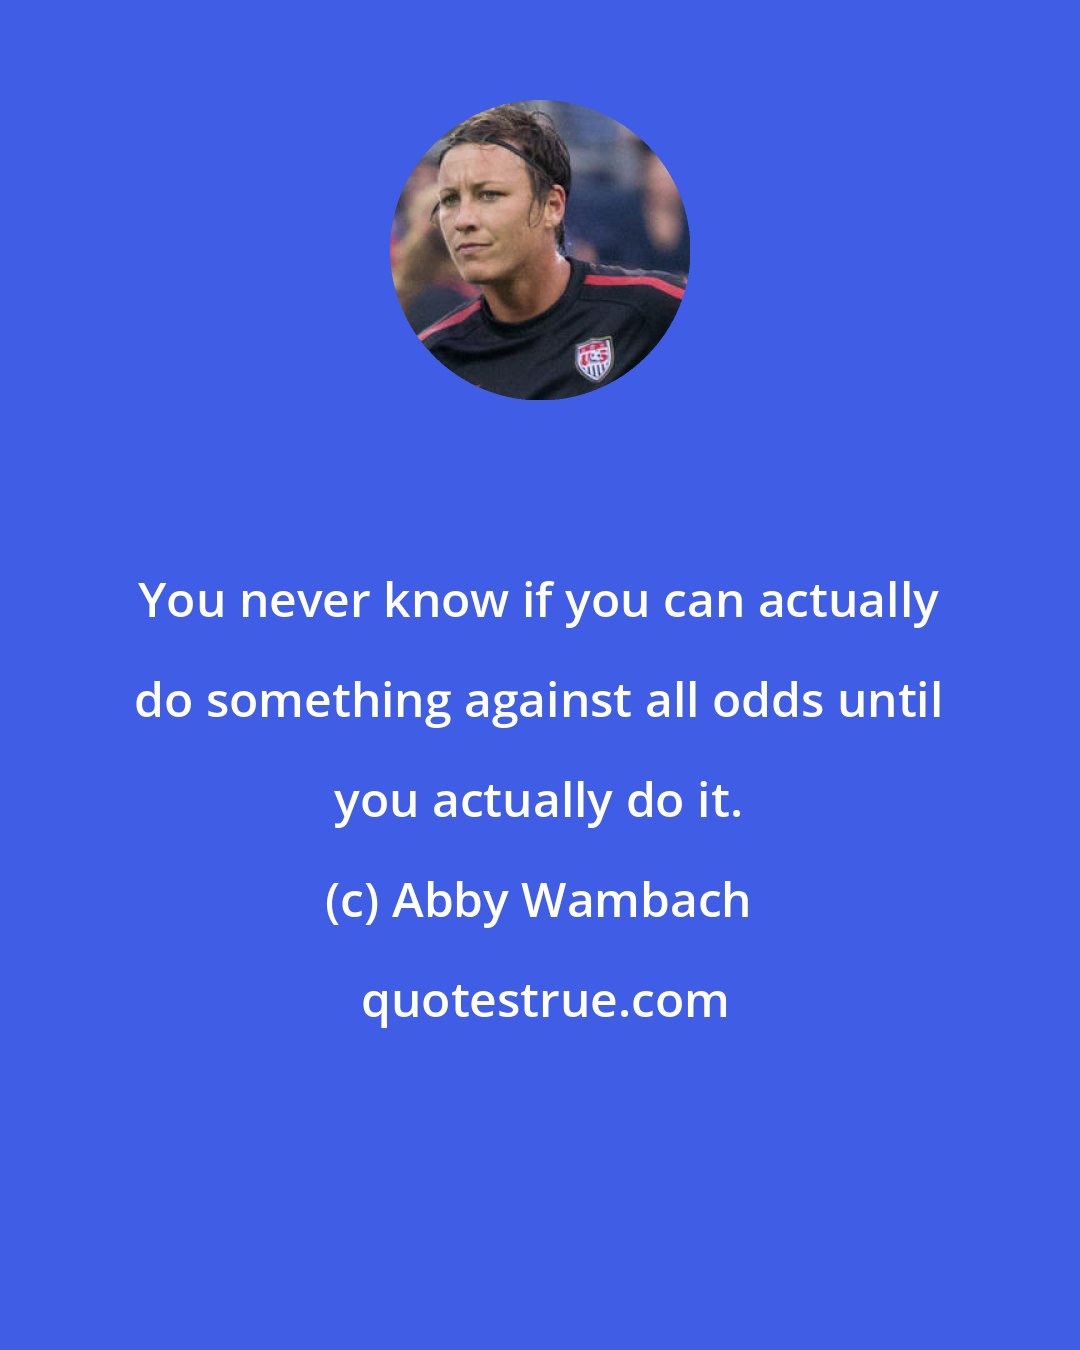 Abby Wambach: You never know if you can actually do something against all odds until you actually do it.